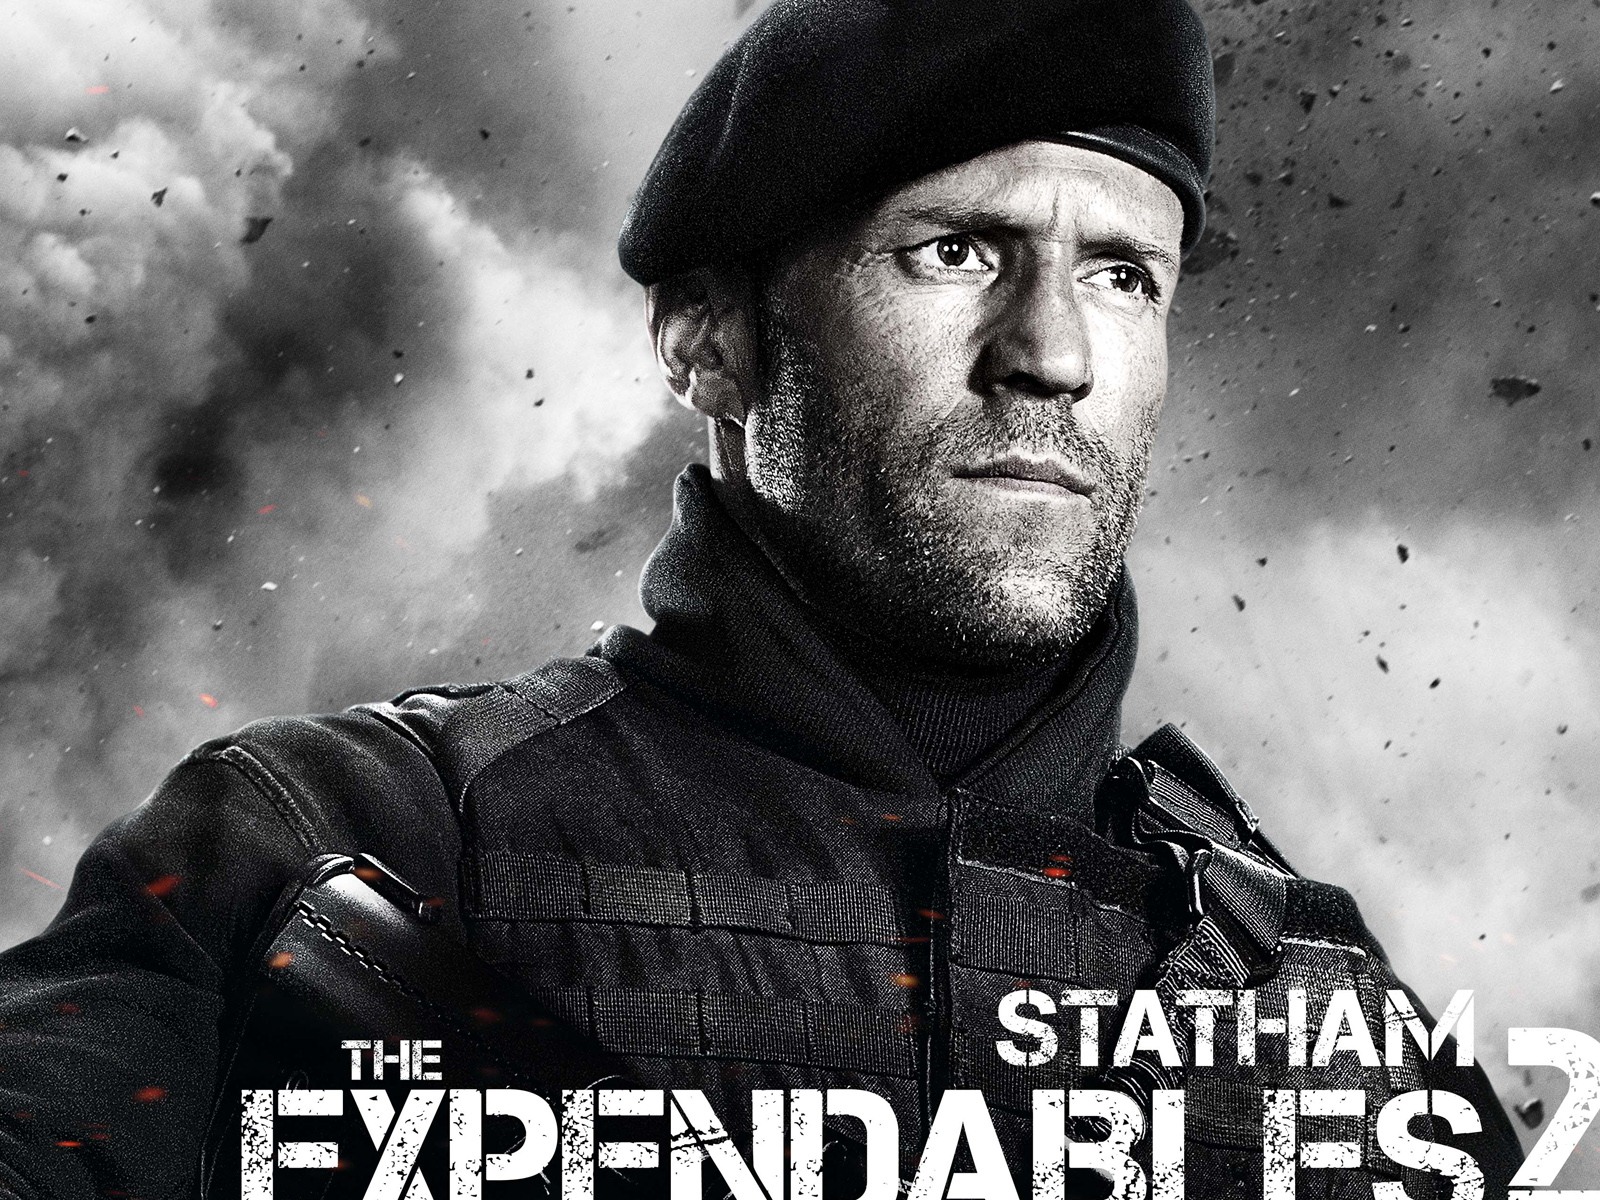 2012 The Expendables 2 敢死队2 高清壁纸5 - 1600x1200